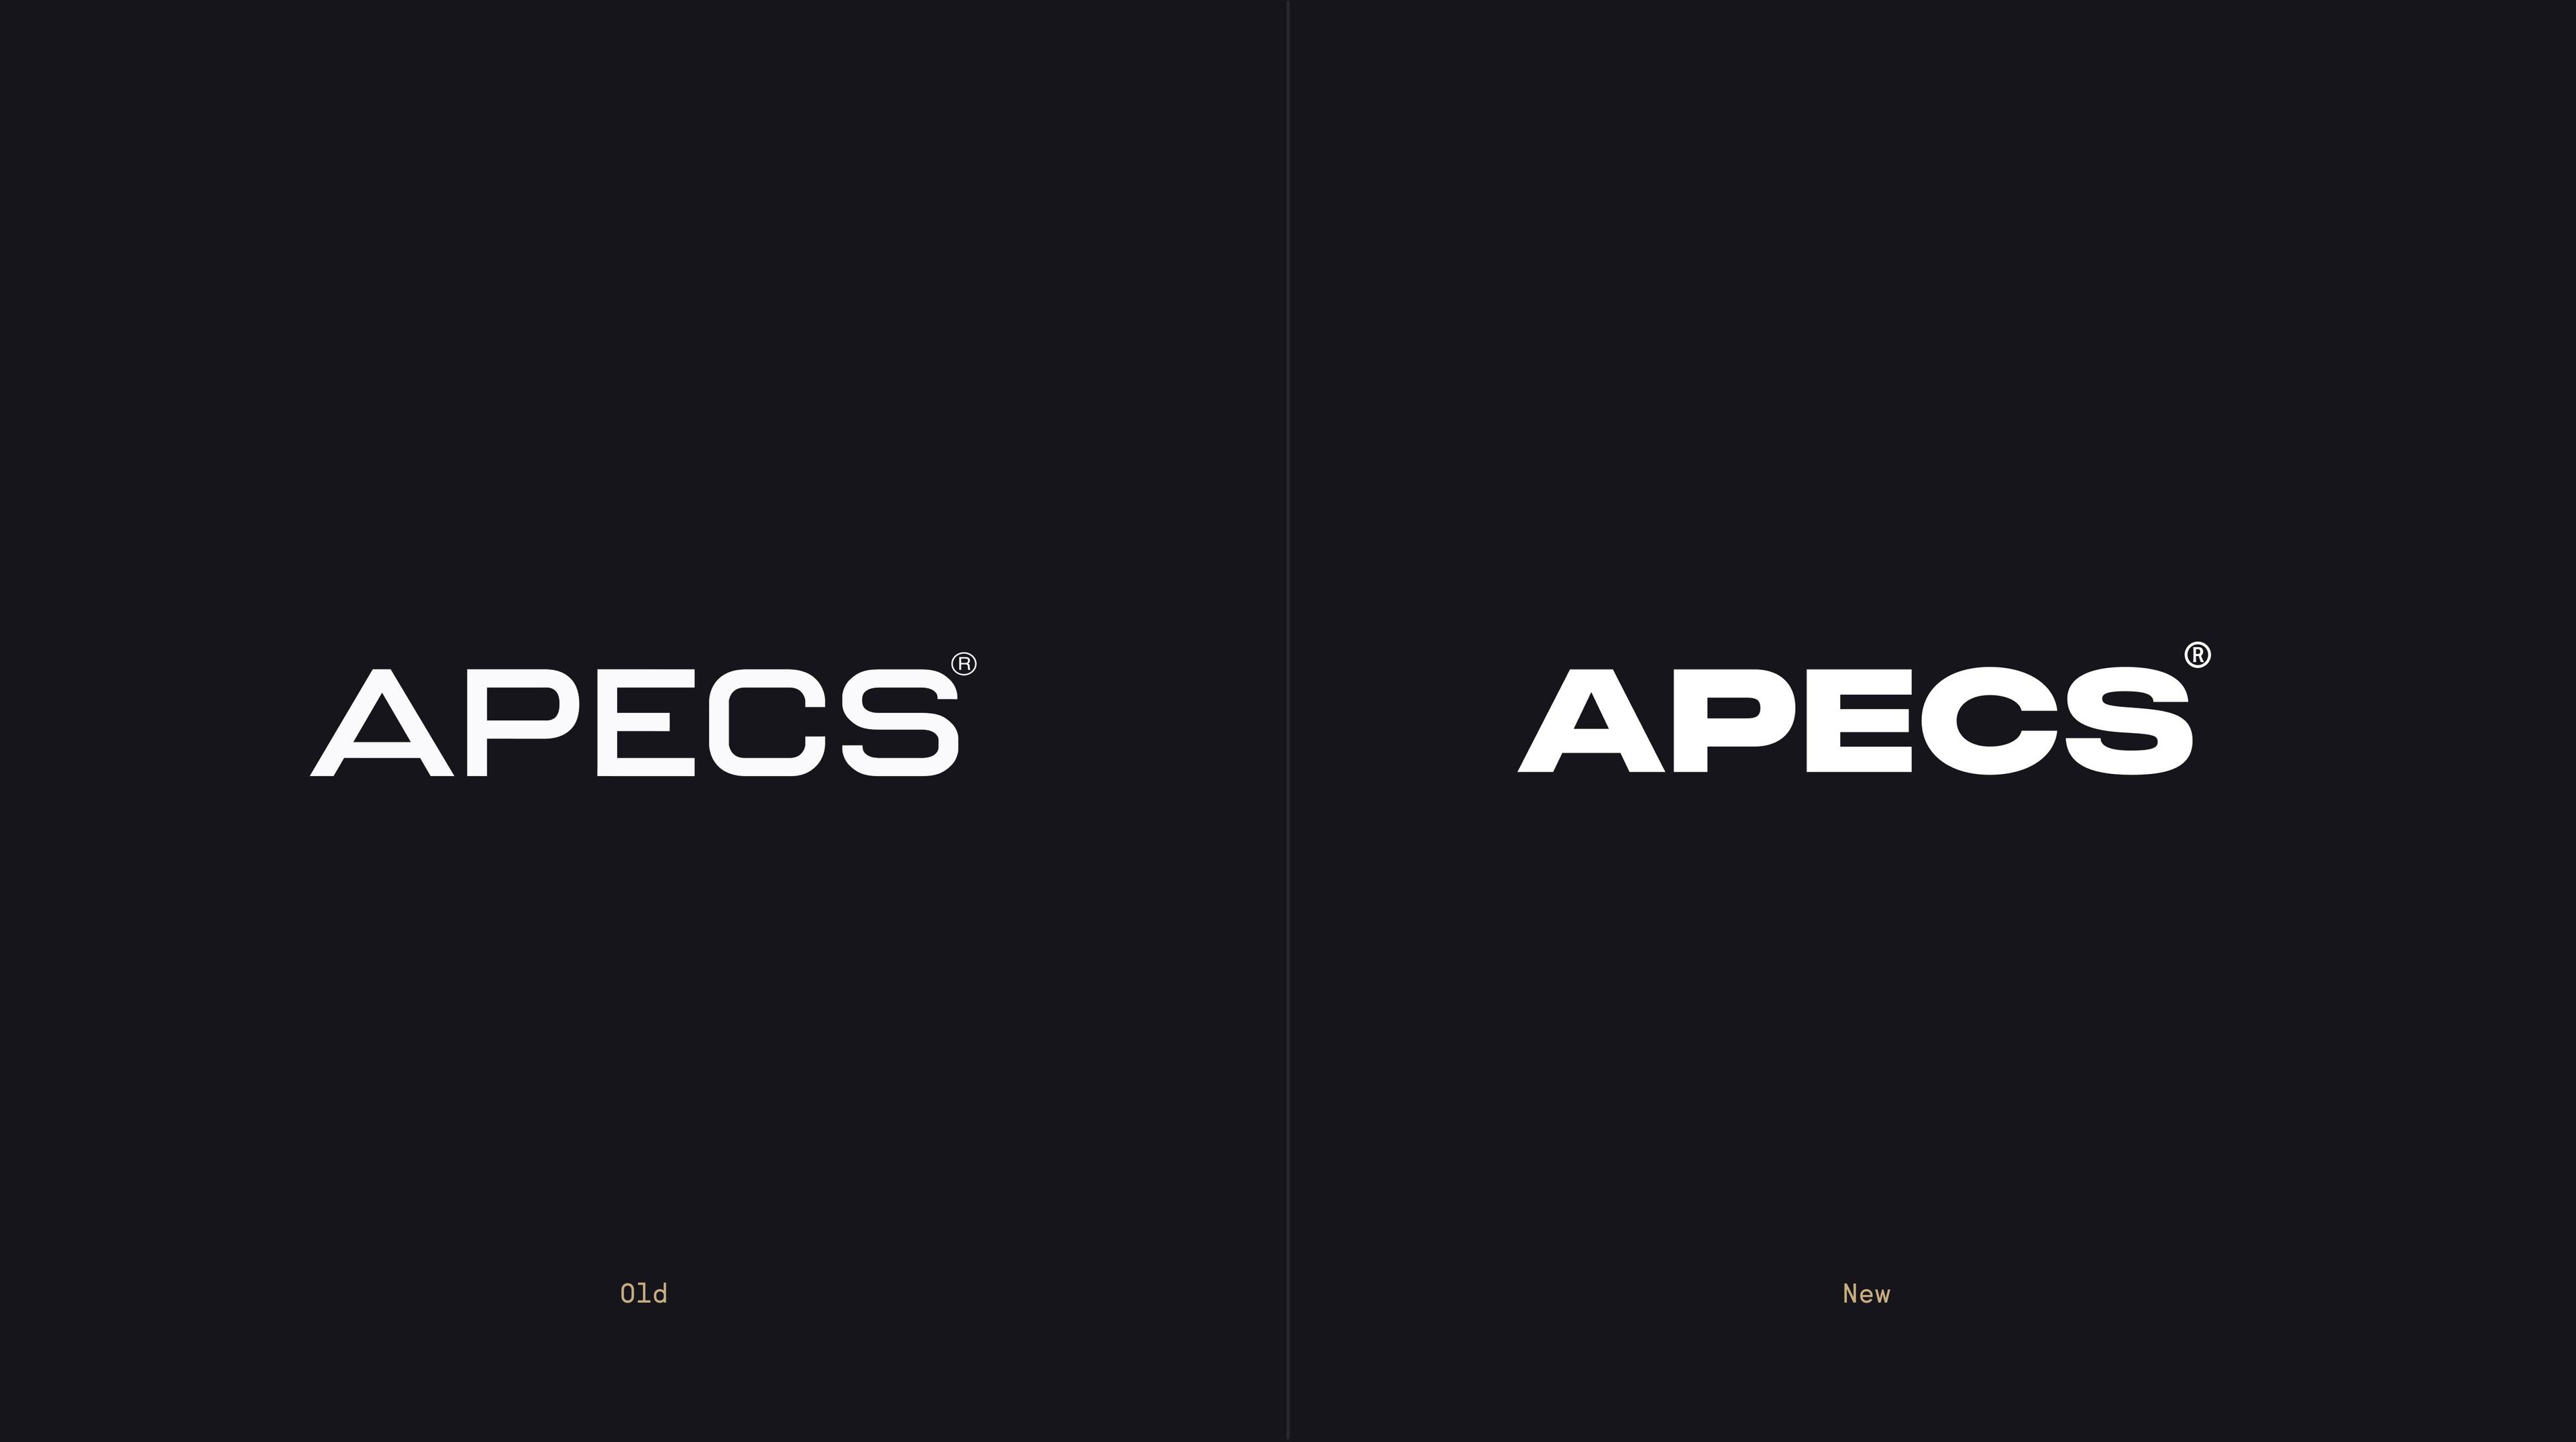 Apecs logo before and after